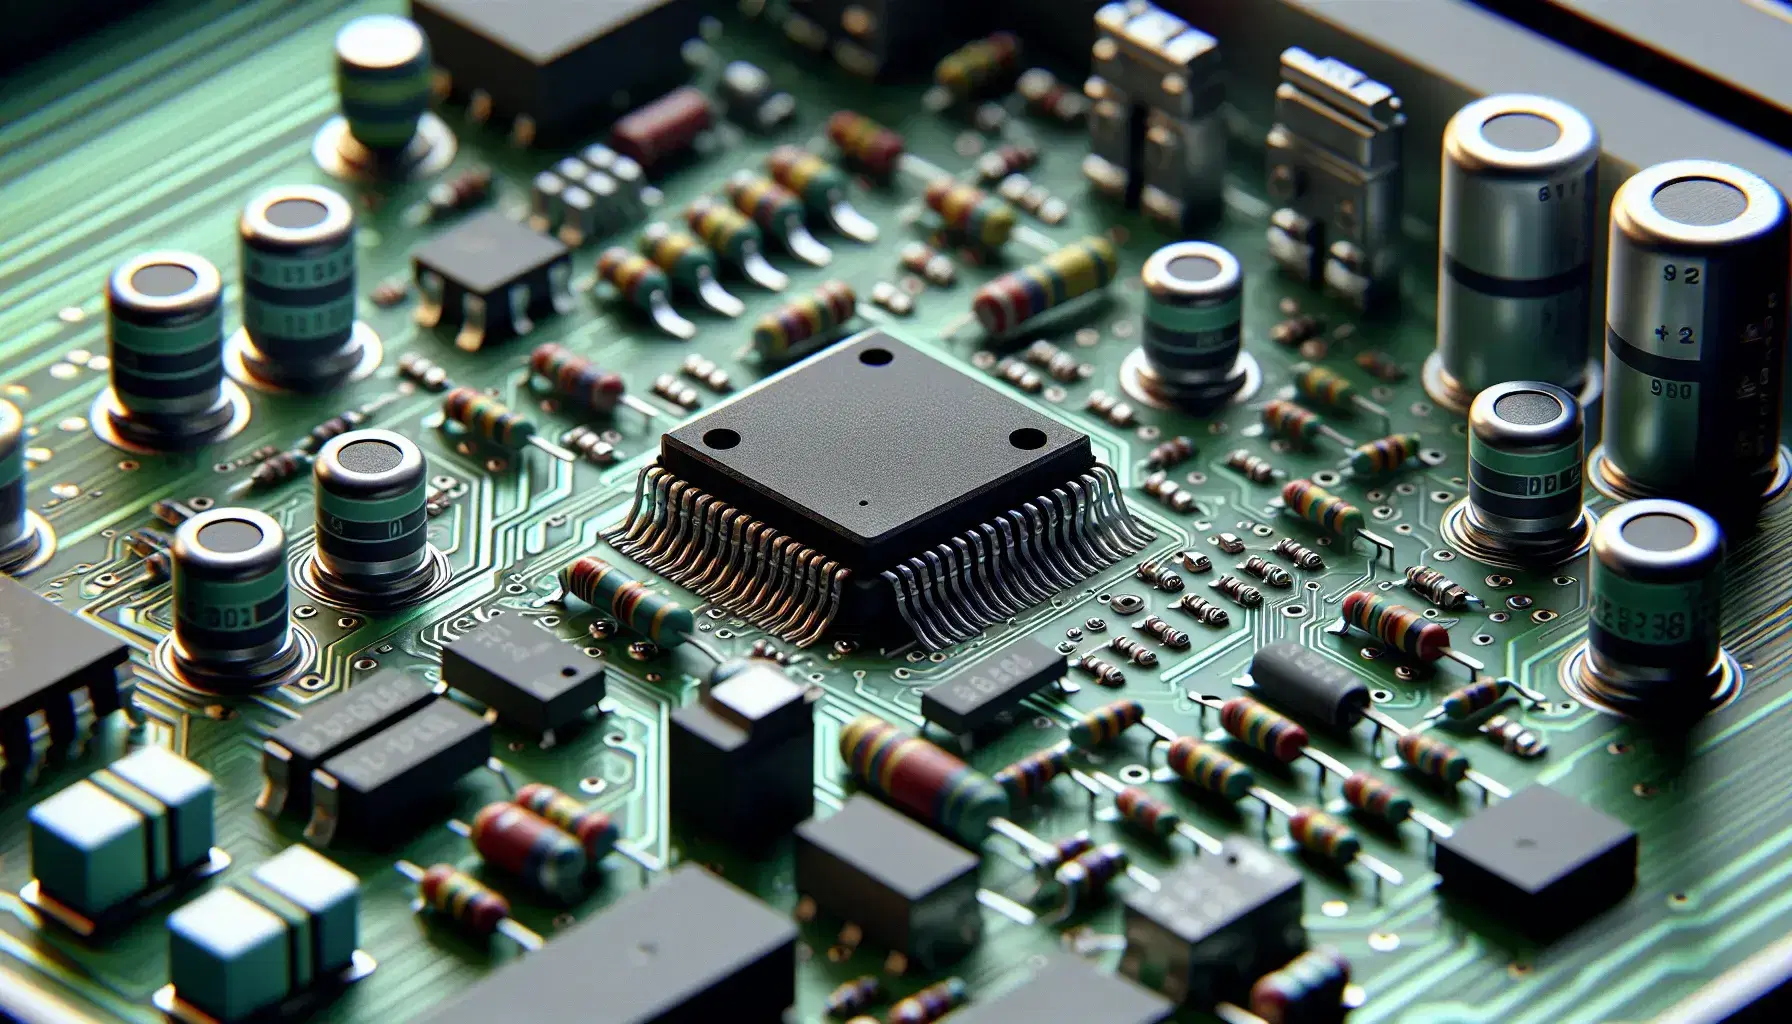 Close-up of an electronic board with black integrated circuit, colored resistors, metal capacitors and diodes, on green printed circuit board.